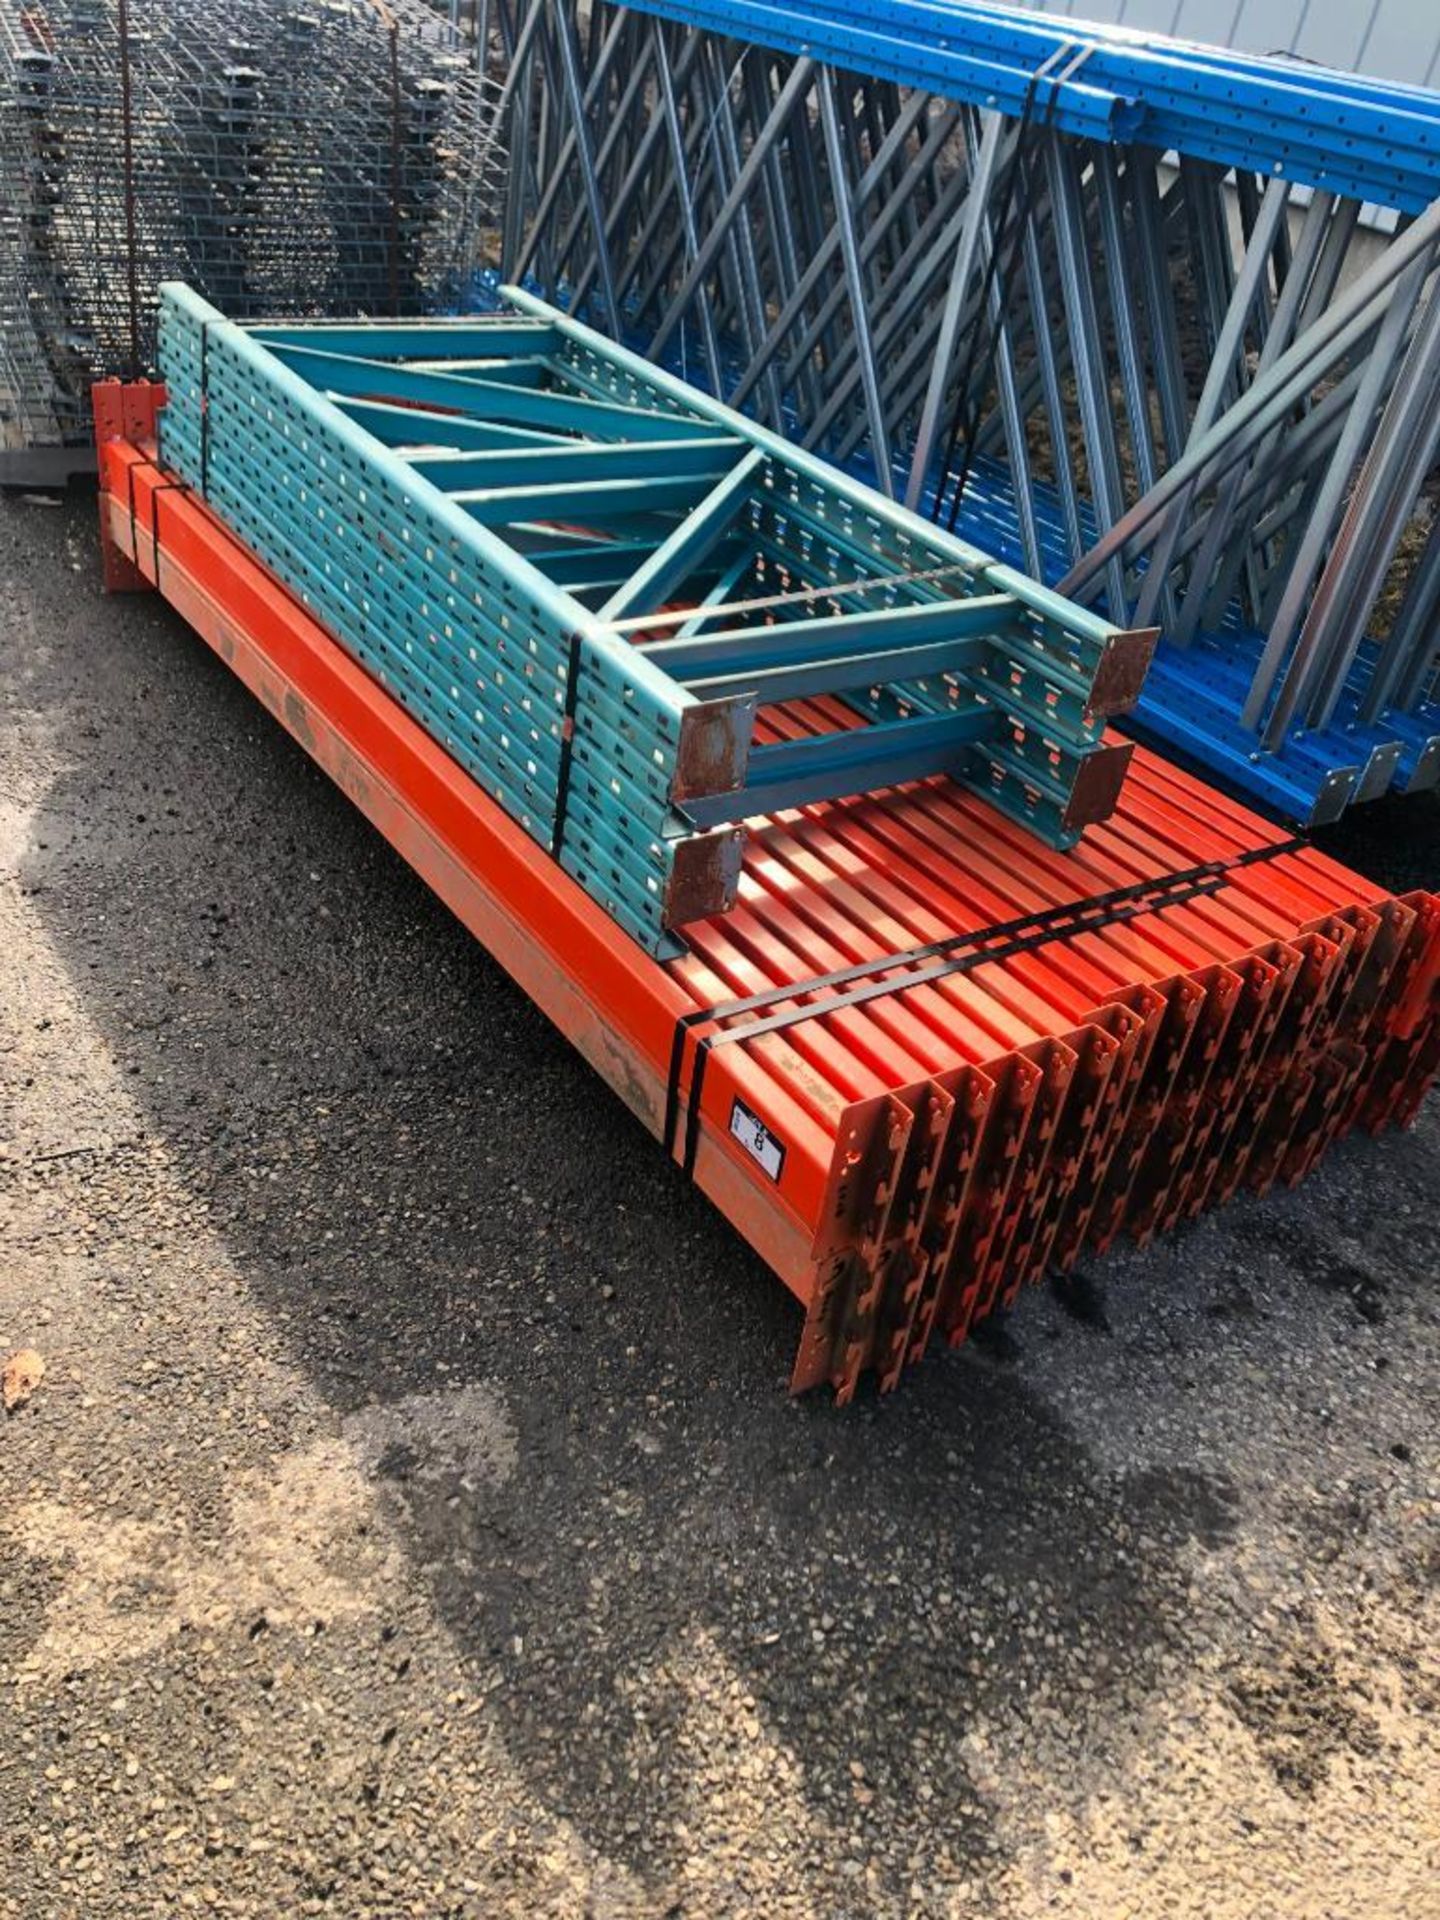 Lot of Asst. Sections of Pallet Racking including (4) 6' X 30" Unirack Uprights and (40) 8' x 4" Bea